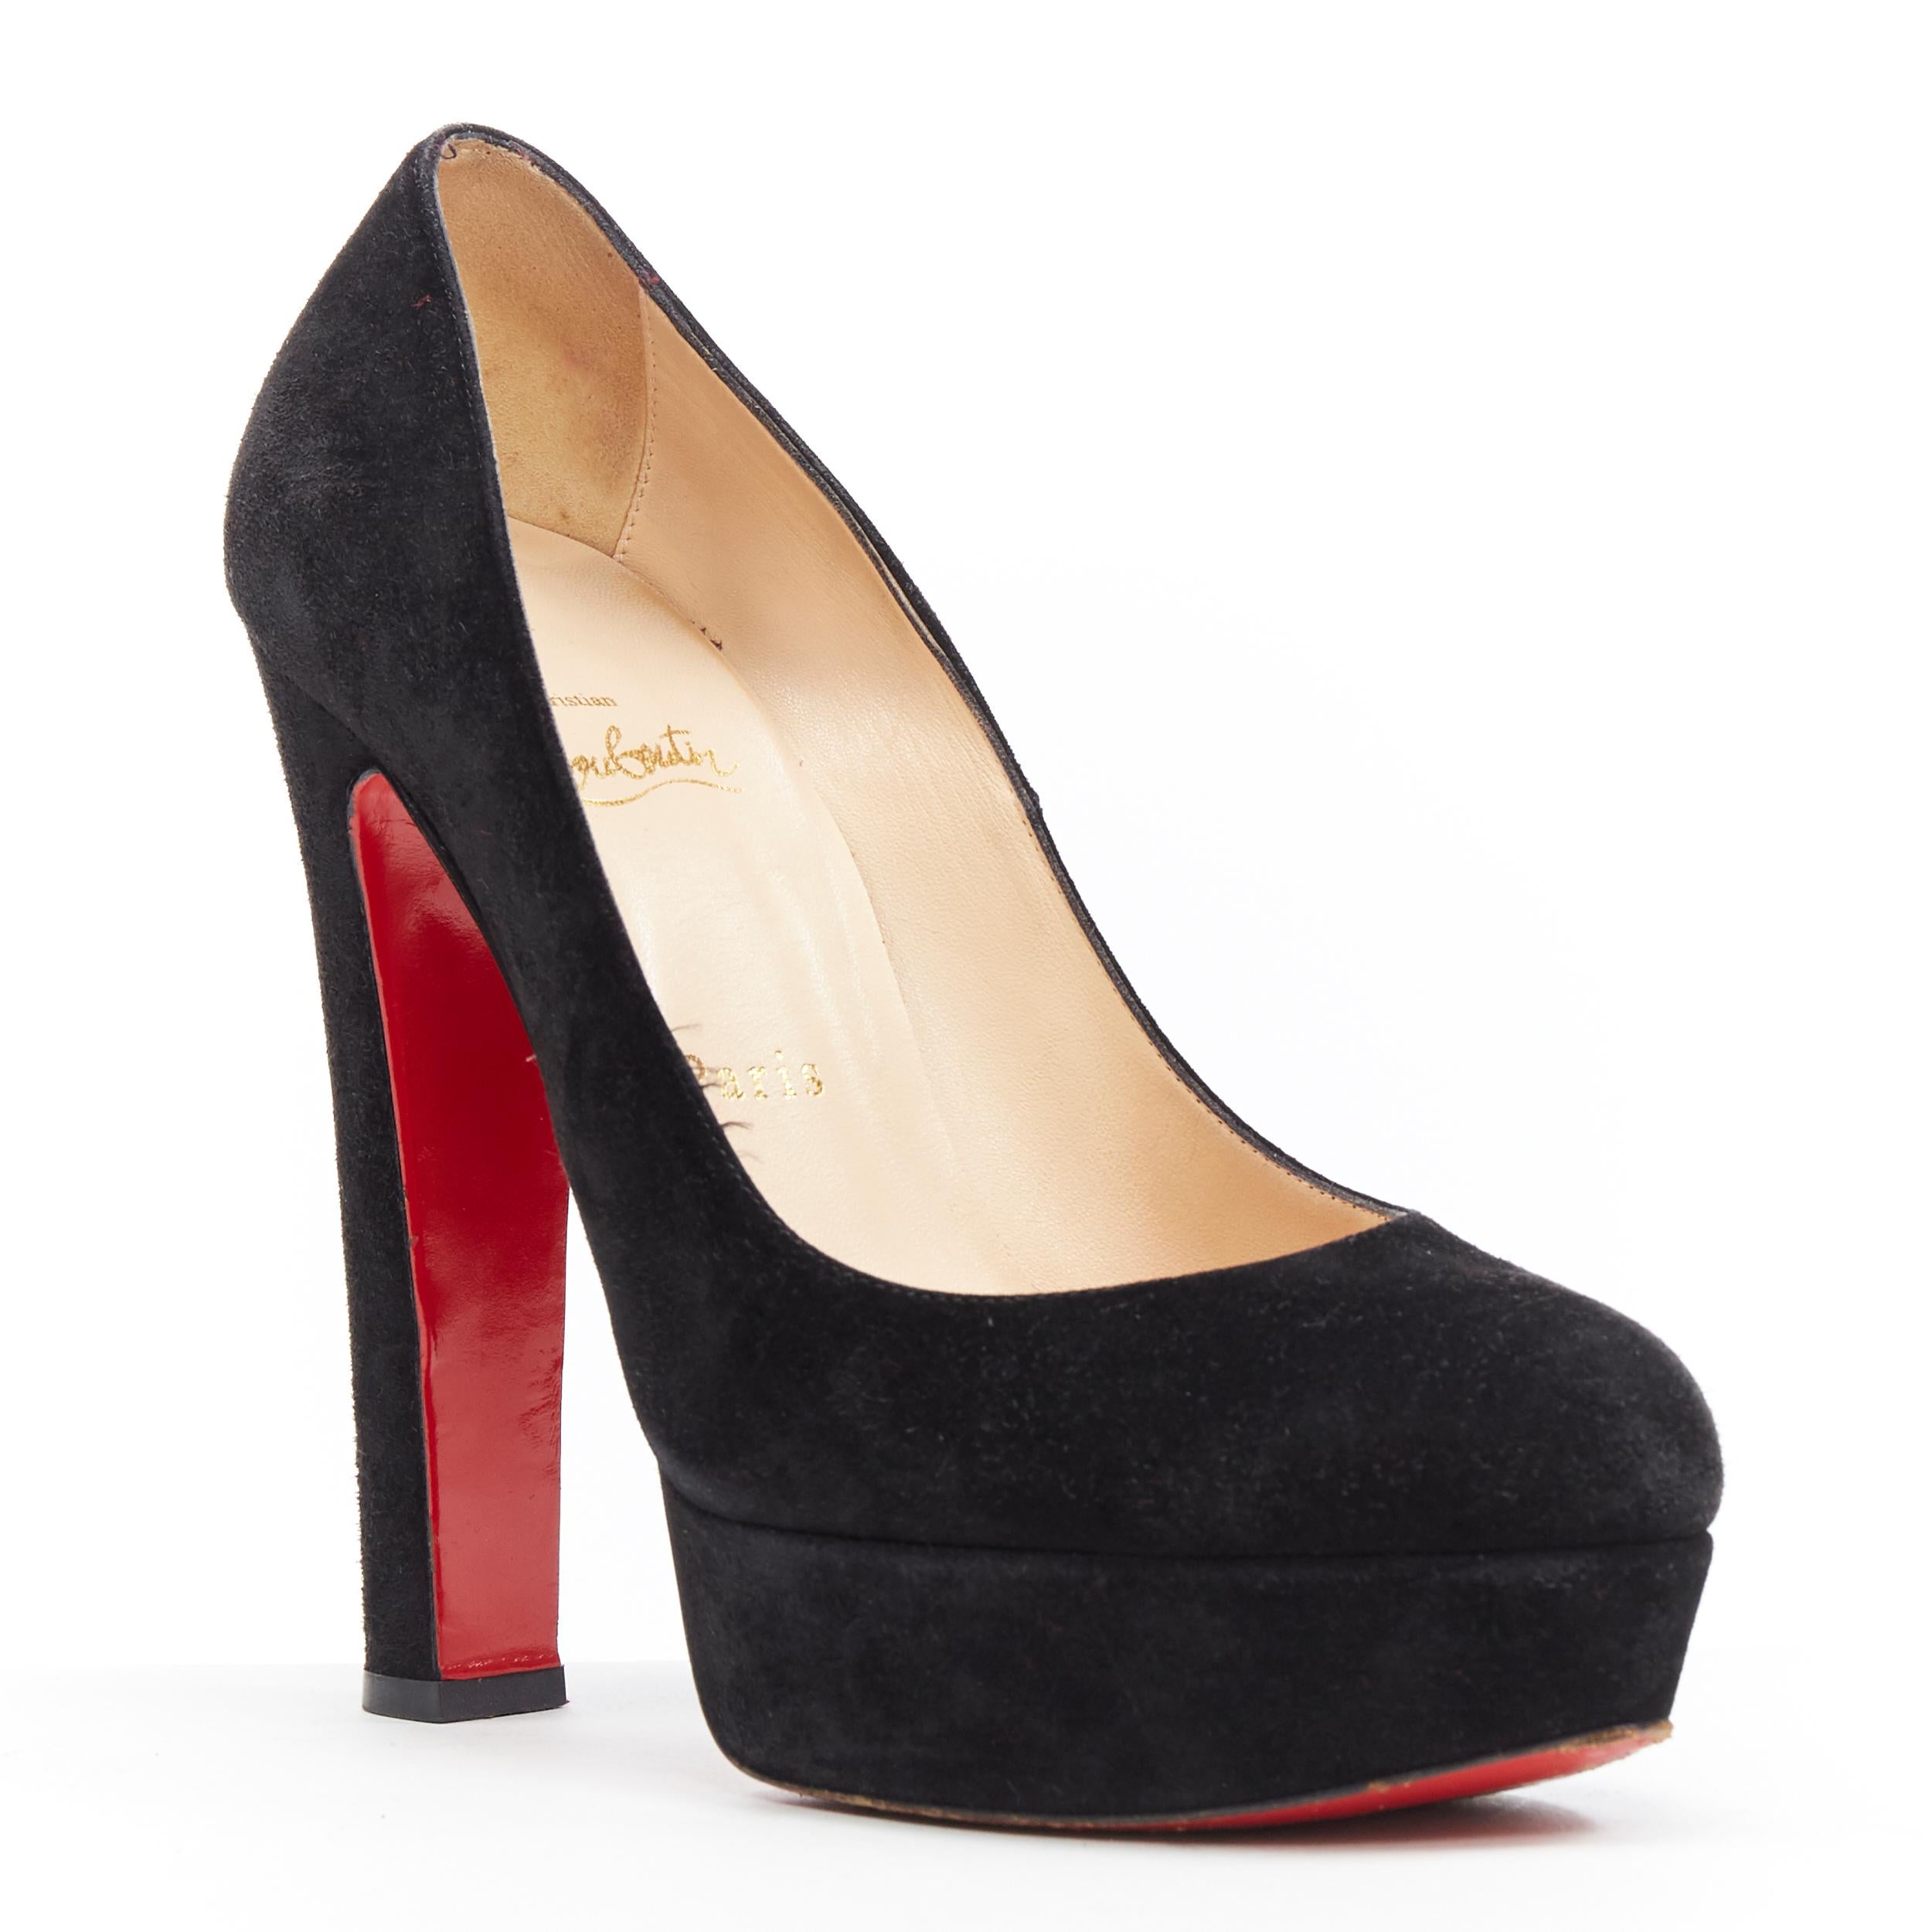 CHRISTIAN LOUBOUTIN Bibi 140 black suede almond toe platform chunky heel EU38.5
Brand: Christian Louboutin
Designer: Christian Louboutin
Model Name / Style: Bibi 140
Material: Suede
Color: Black
Pattern: Solid
Lining material: Leather
Extra Detail: